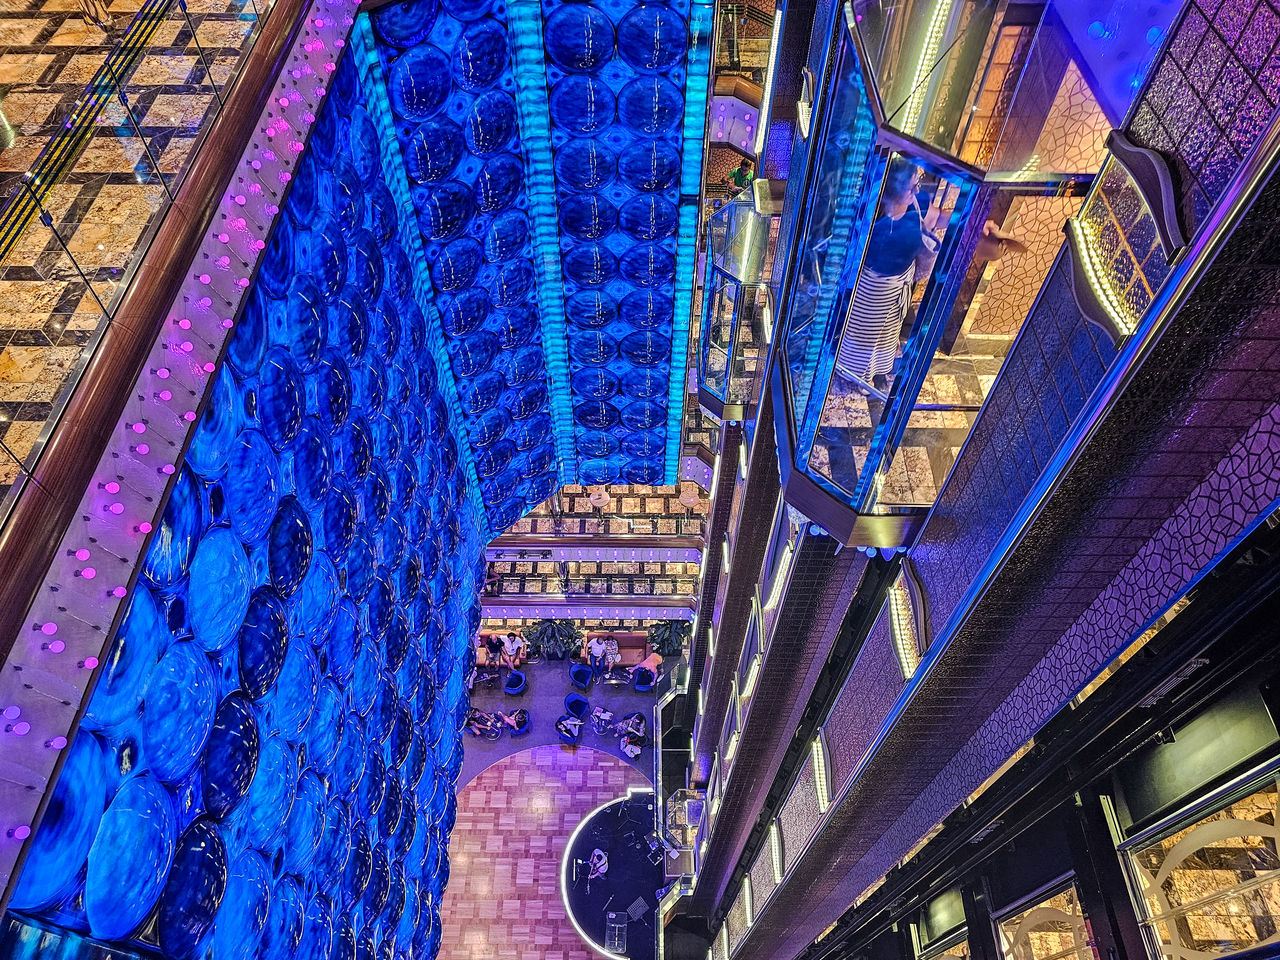 architecture, built structure, blue, building exterior, low angle view, no people, metropolis, night, illuminated, urban area, multi colored, city, building, cityscape, travel destinations, pattern, outdoors, skyscraper